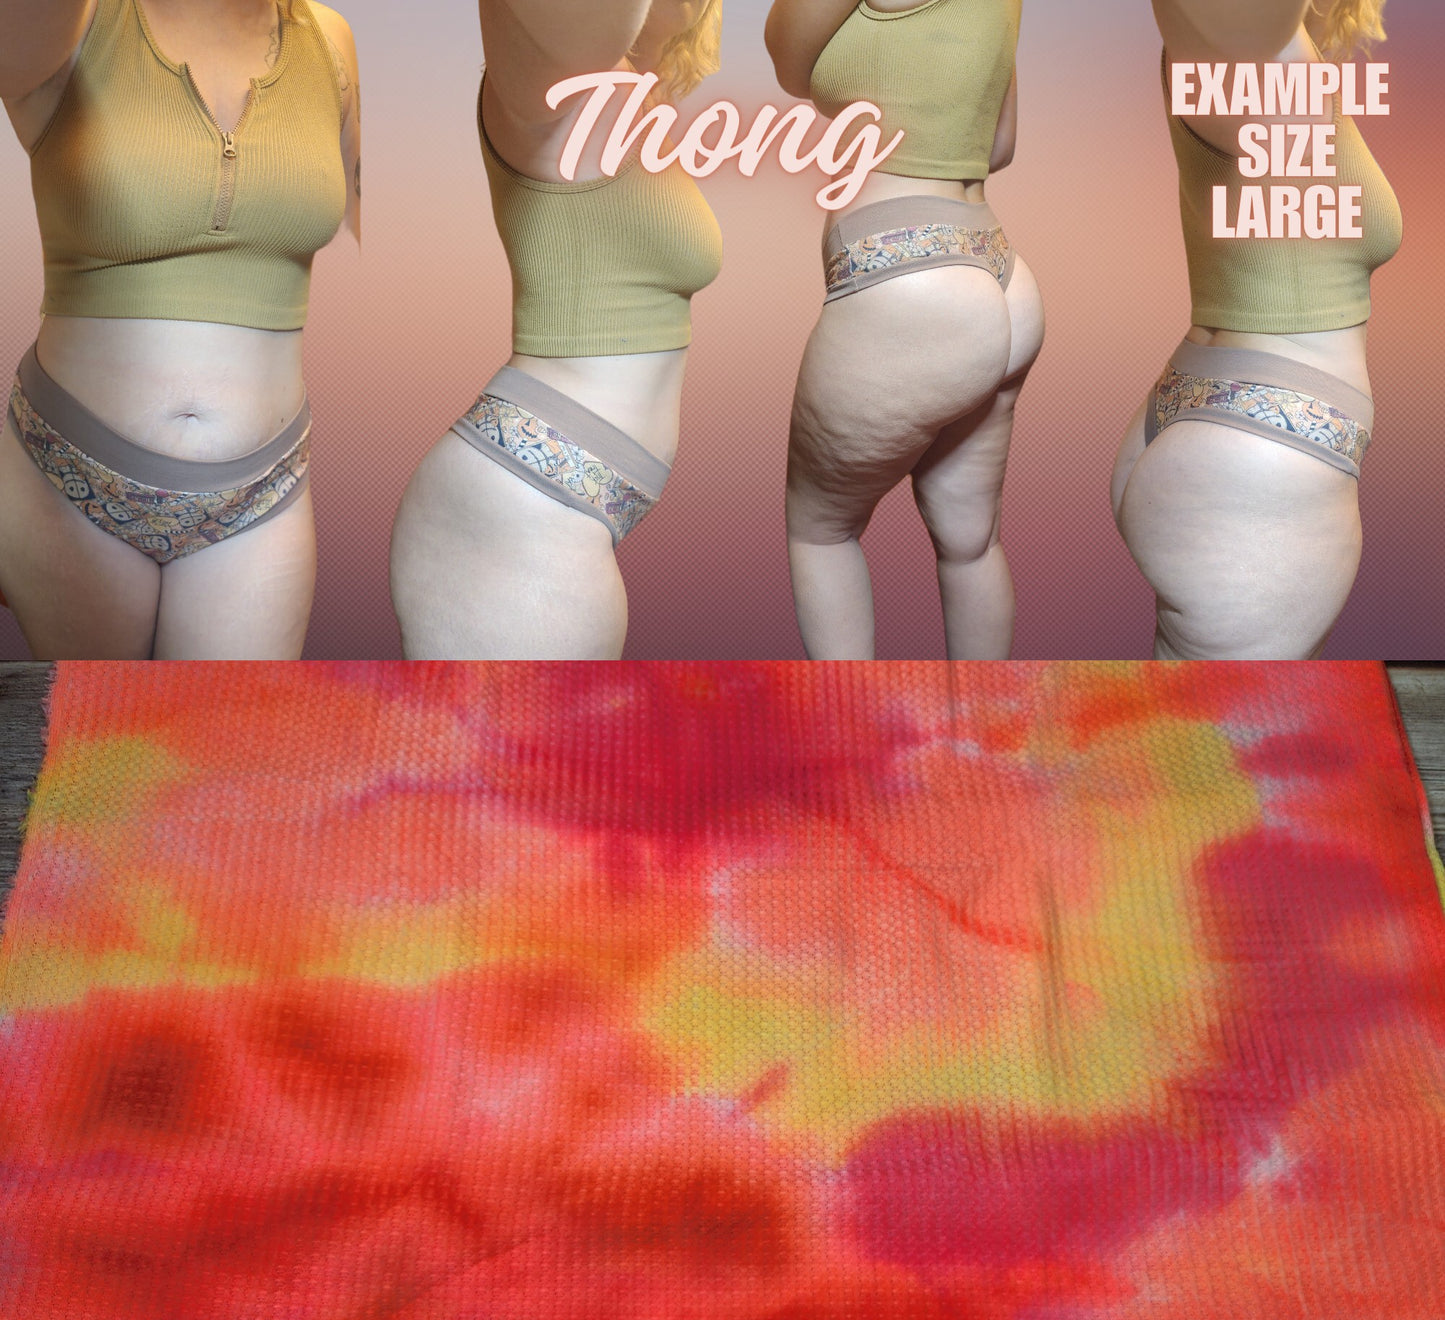 Lips, Tie Dye x6 Prints | Thondlewear, Thongs for every body | Elastic/Knit Bands